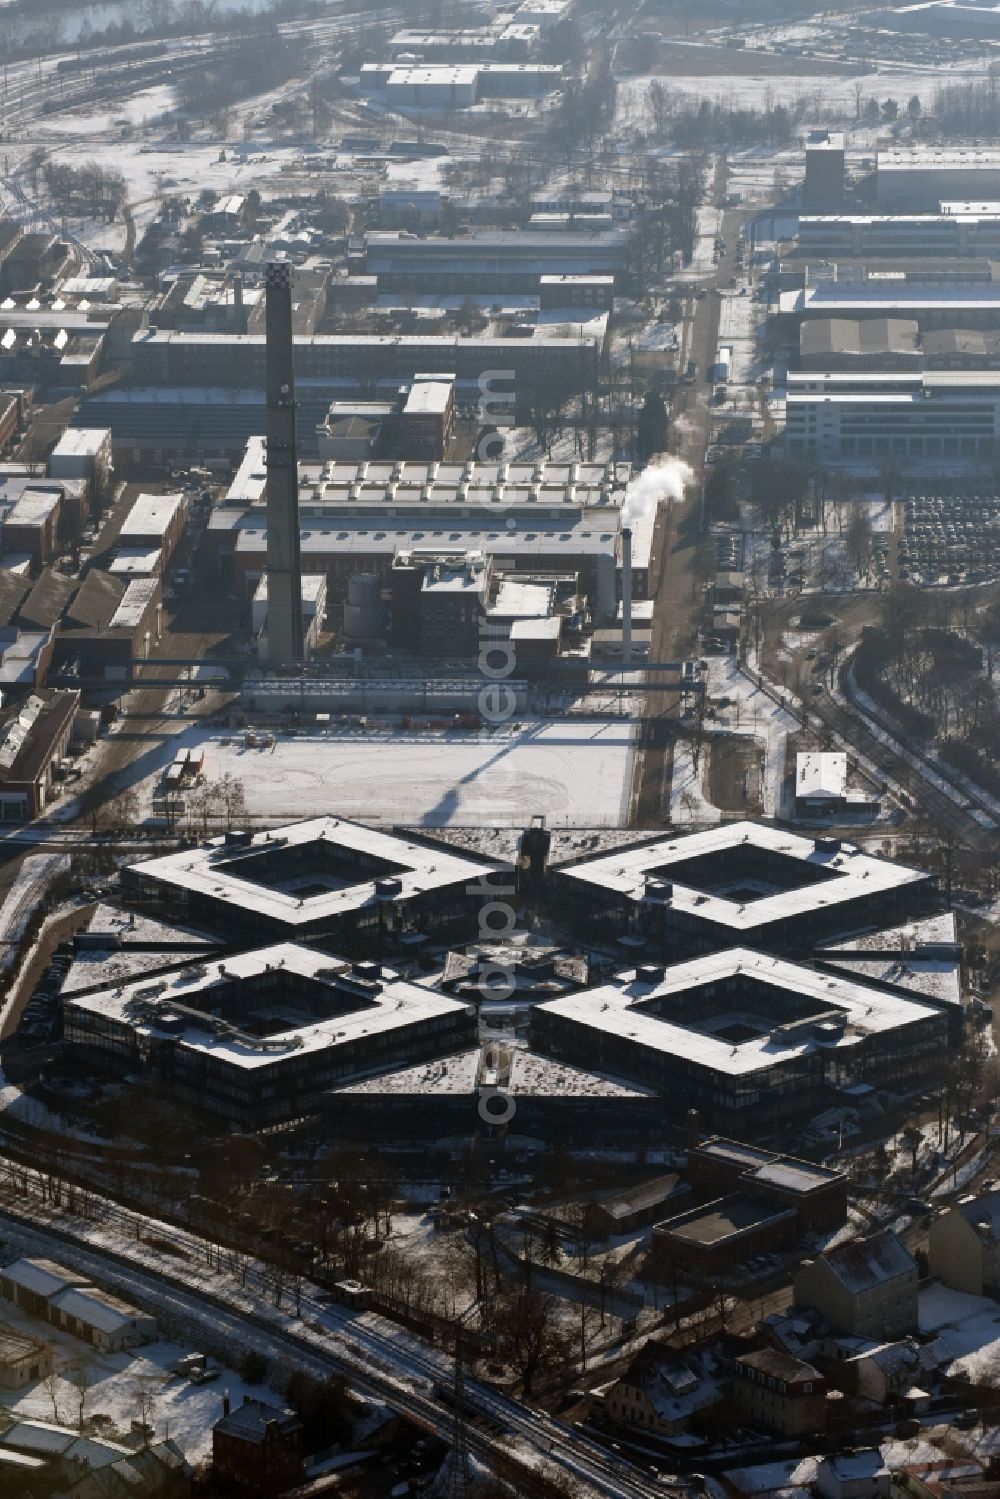 Aerial image Hennigsdorf - Wintry snowy grounds of the Blue Wonder Technology Center in Hennigsdorf in Brandenburg. The technology park Hennigsdorf North offers a business park land for commercial, industrial, service and production